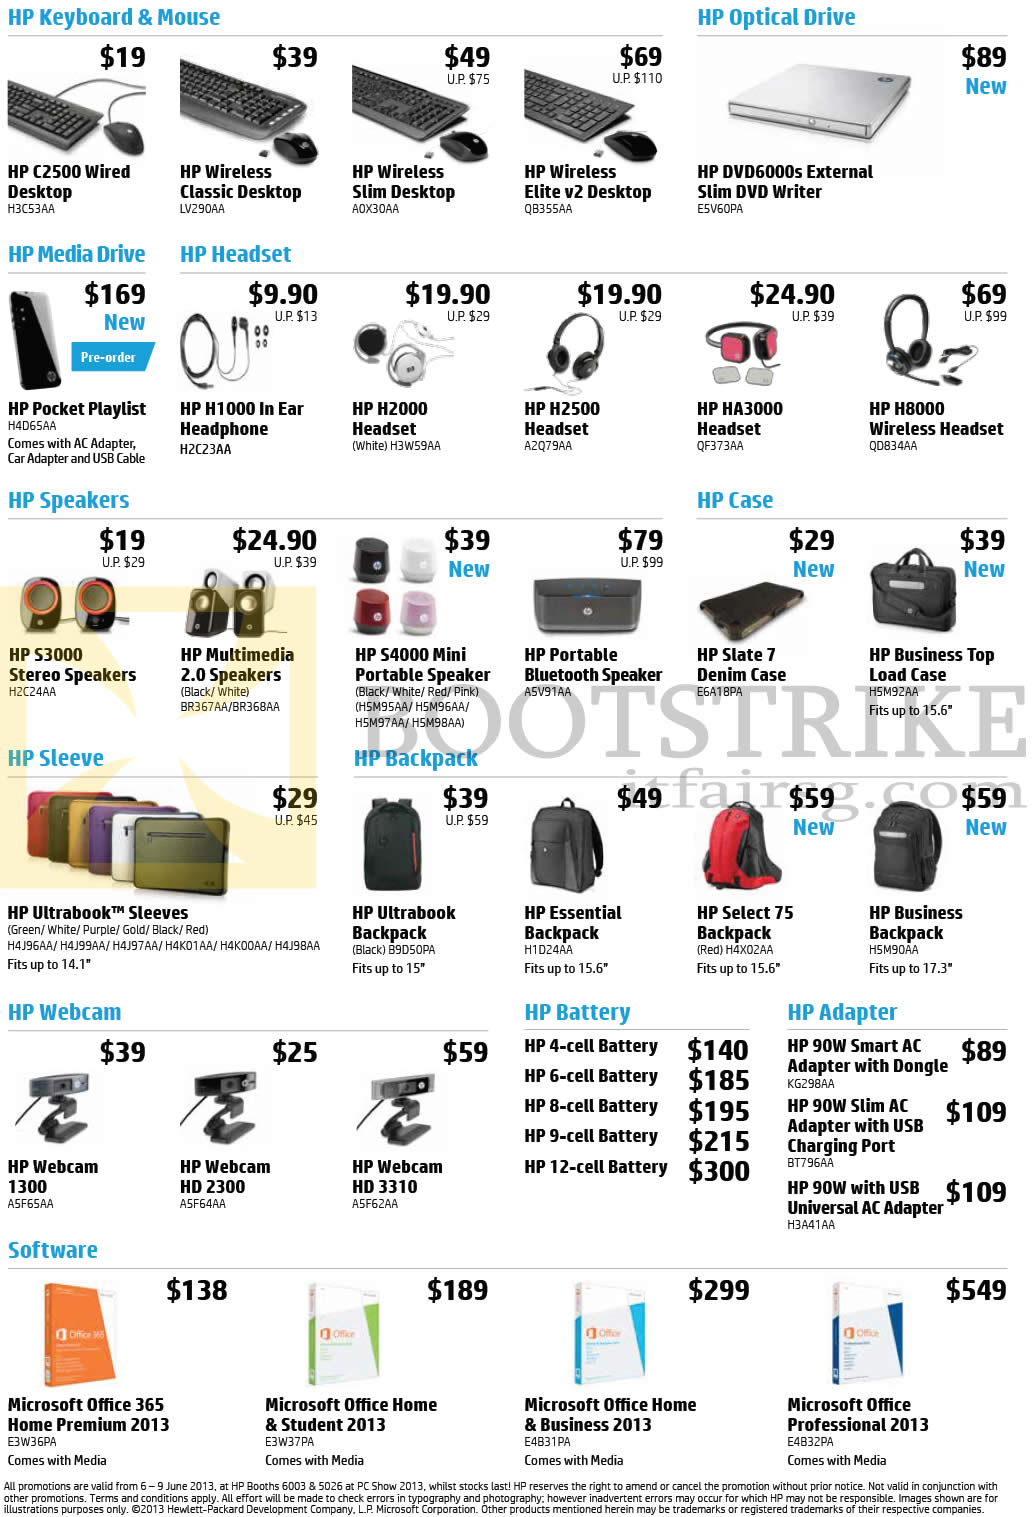 PC SHOW 2013 price list image brochure of HP Keyboards, Mouses, Optical Drives, Media Drives, Headset, Speakers, Backpacks, Webcams, Batteries, Softwares